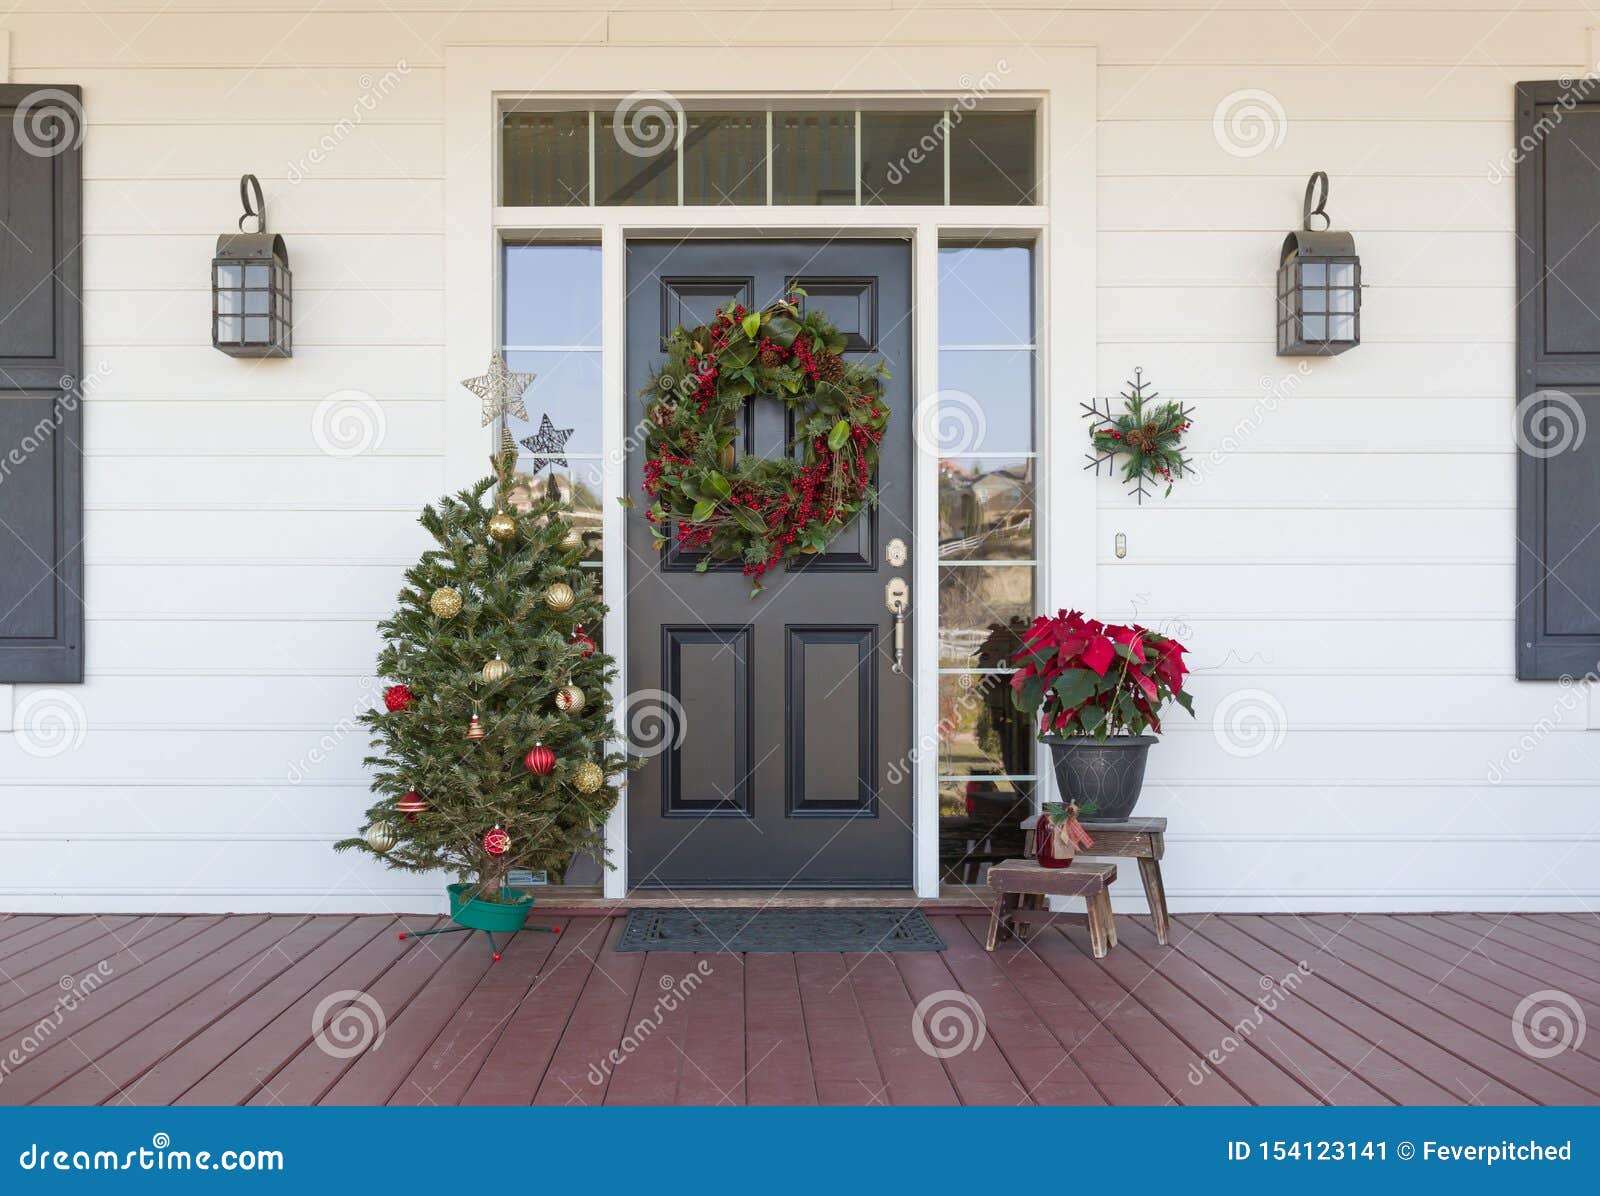 christmas decorations at front door of house